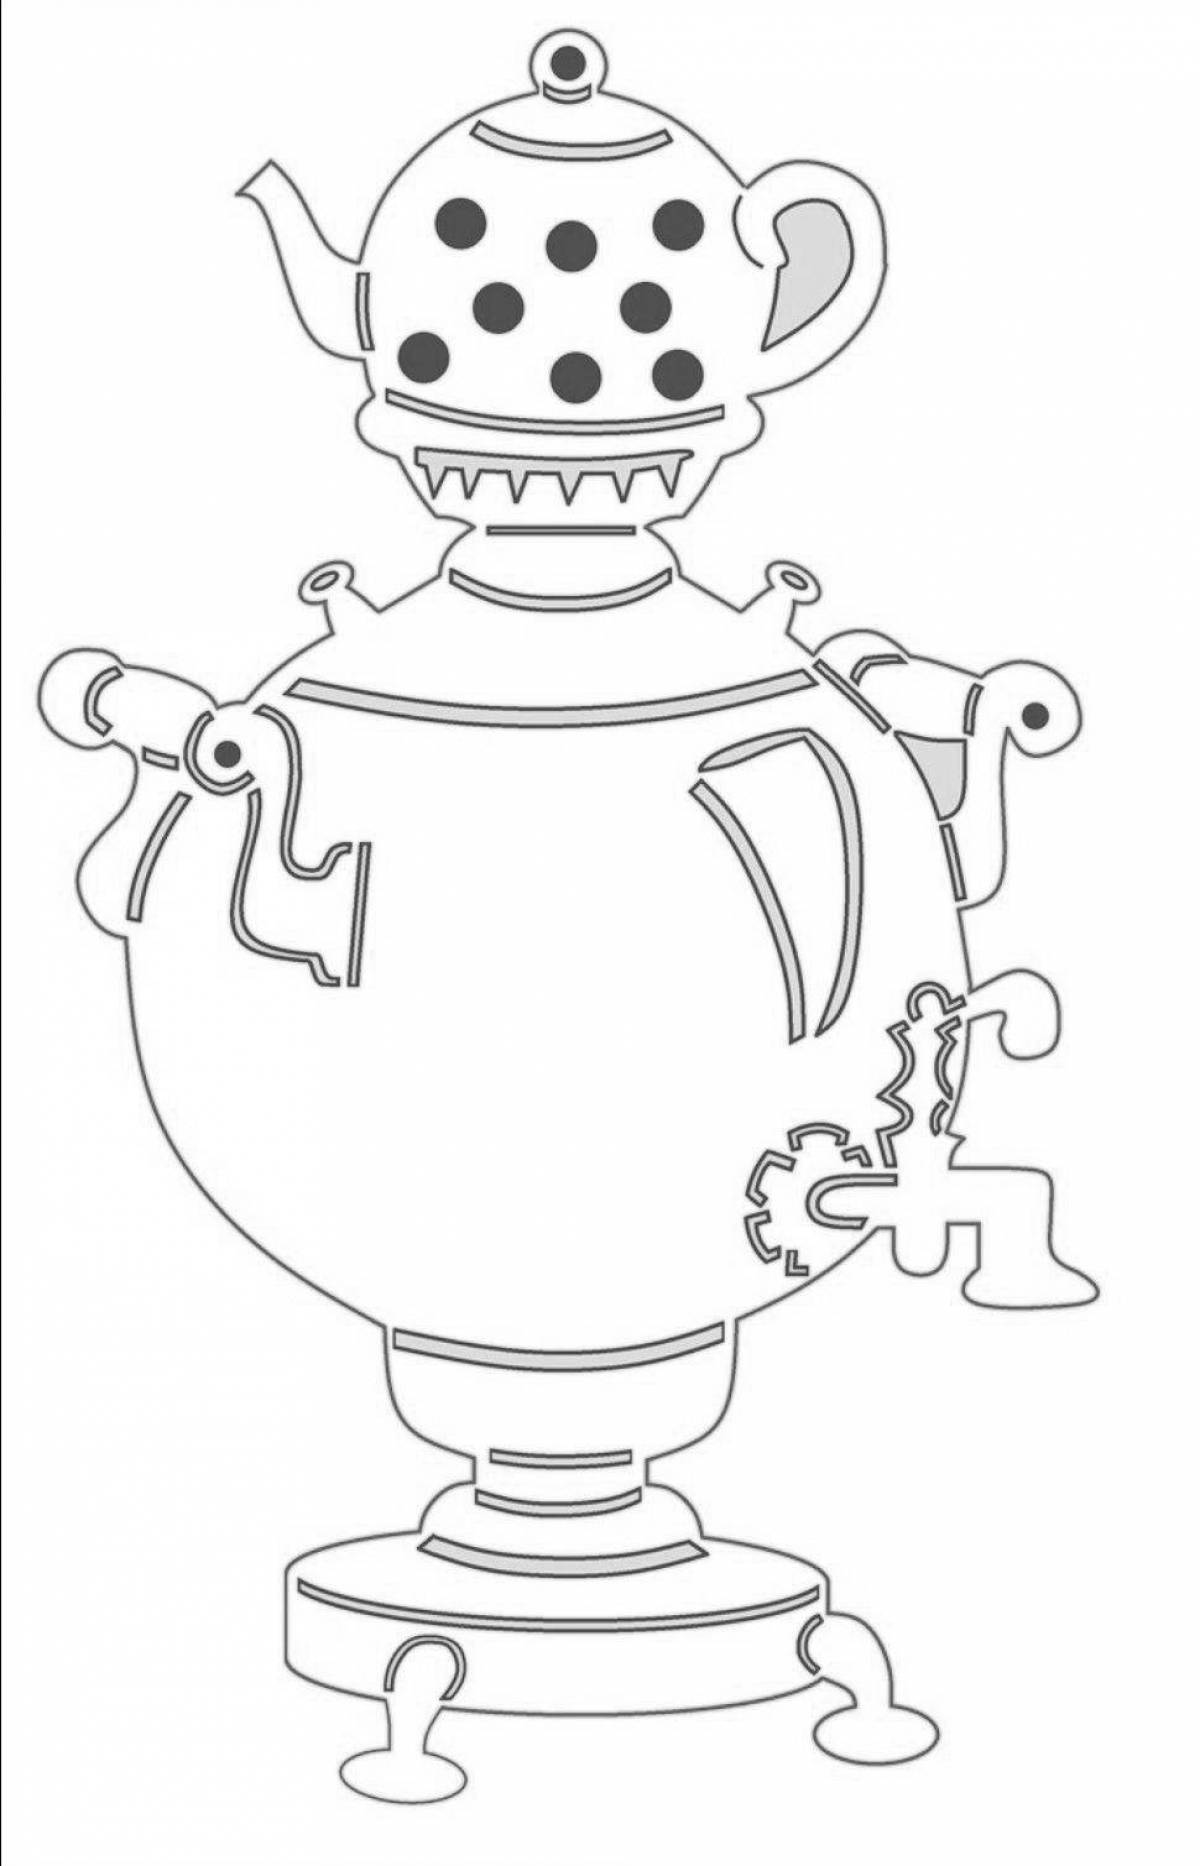 Cute samovar coloring book for children 5-6 years old